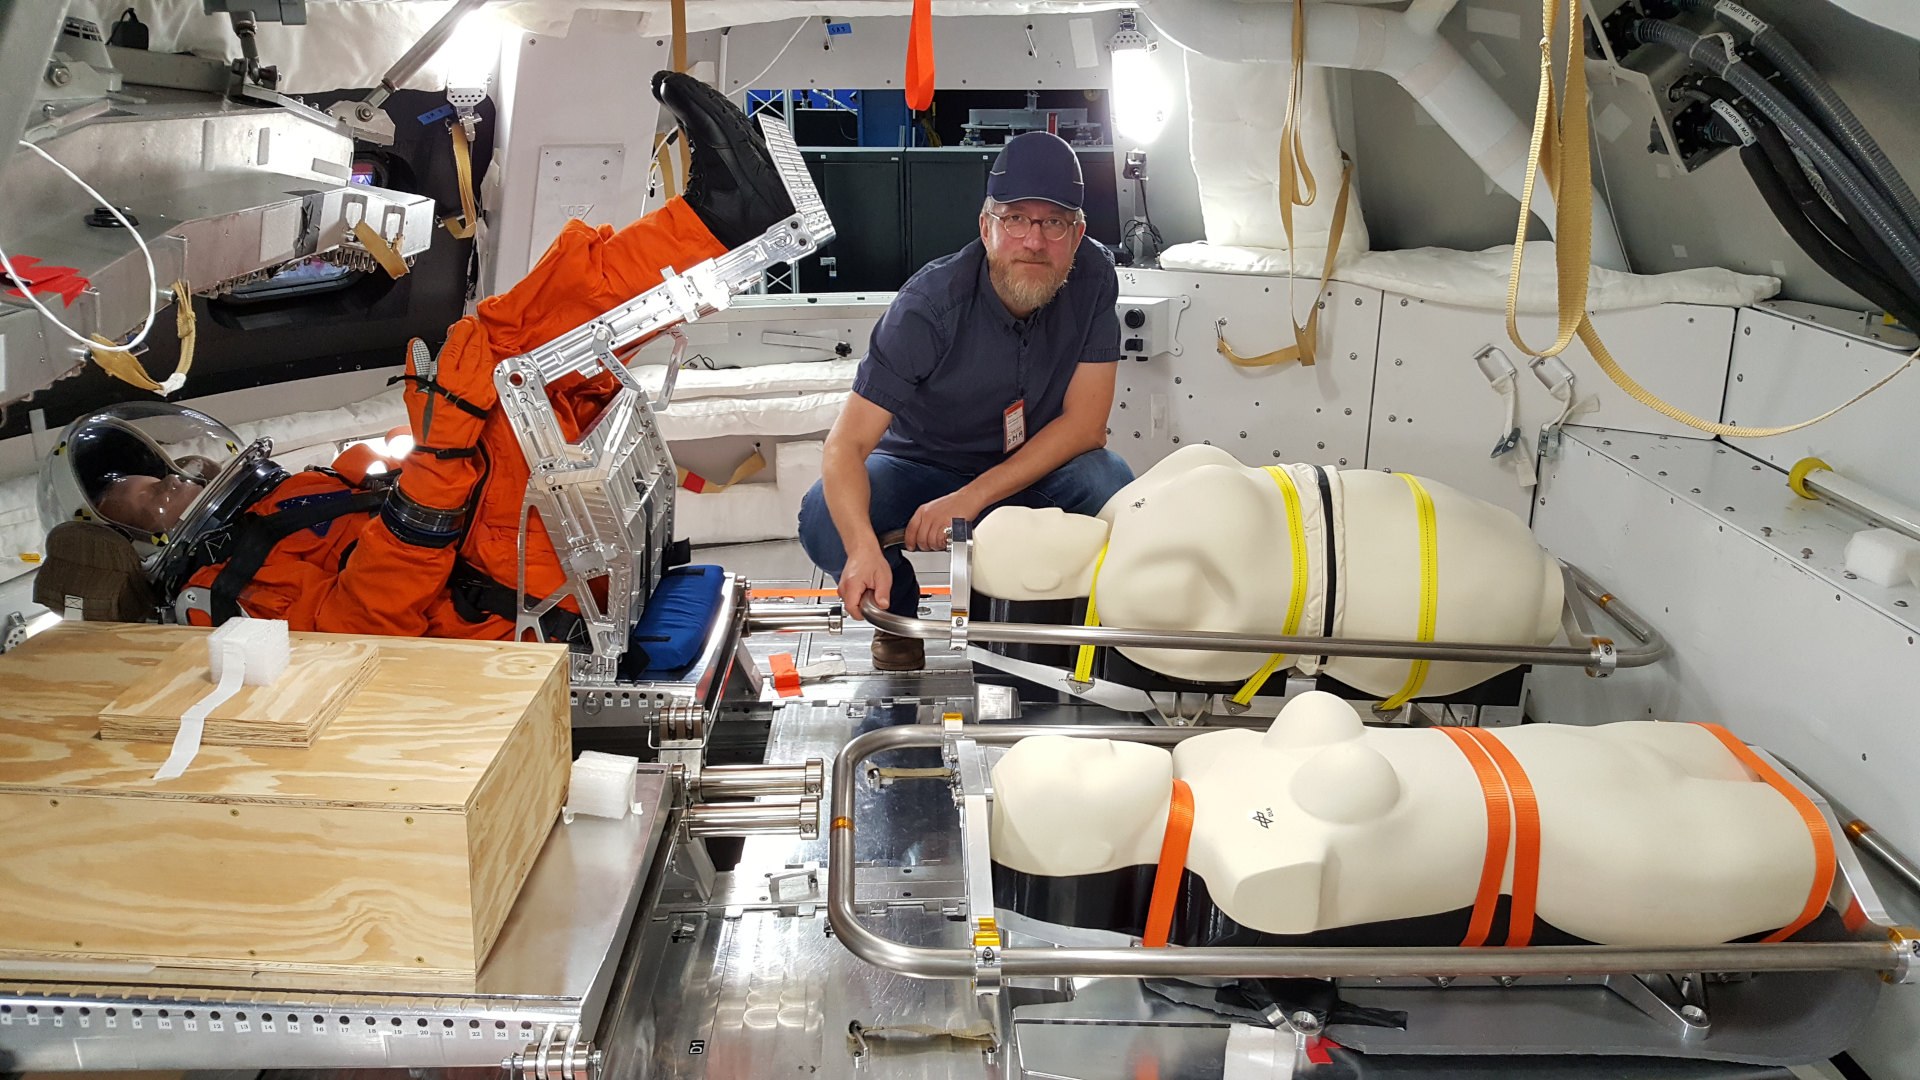 DLR radiation biologist Dr Thomas Berger with the dummies in the Orion capsule